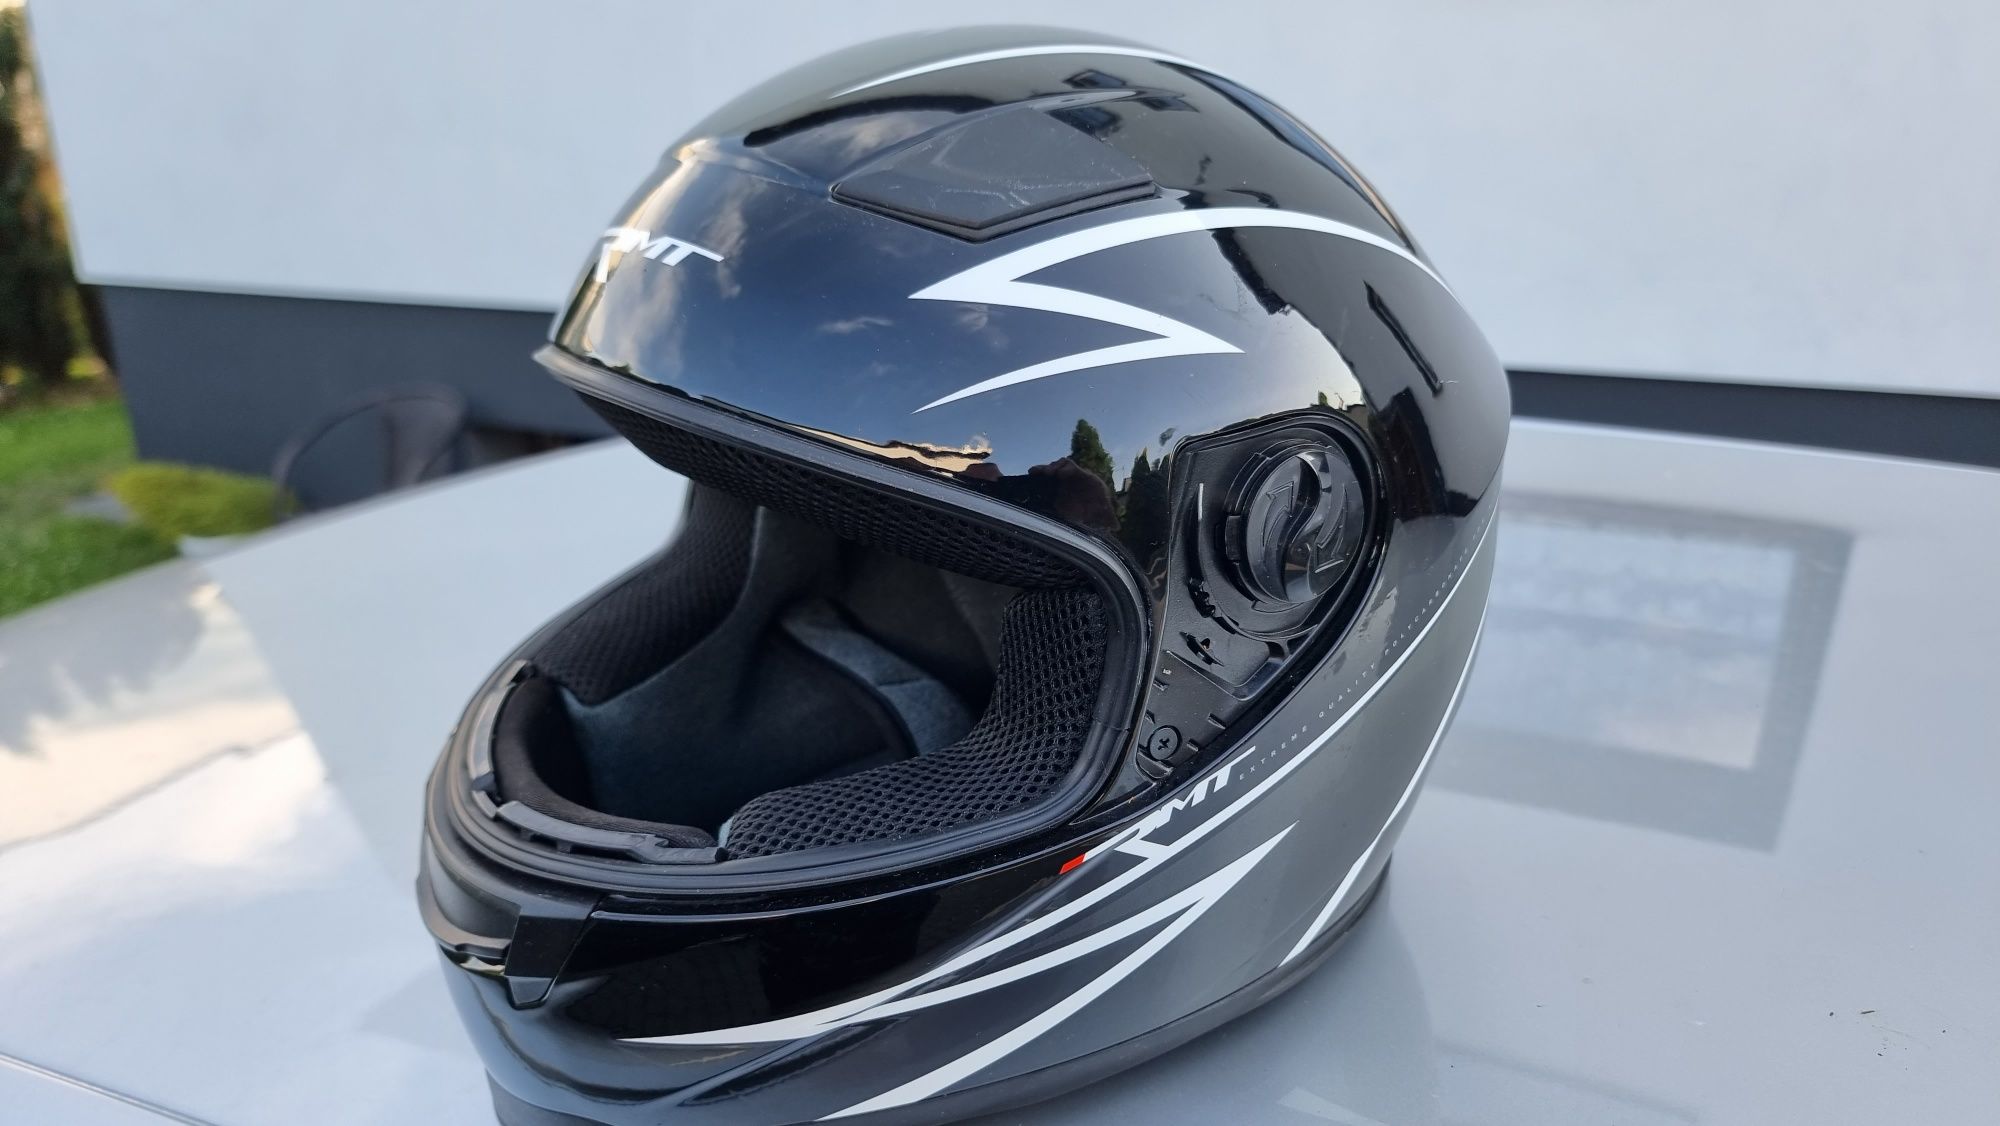 Kask RMT extreme XL